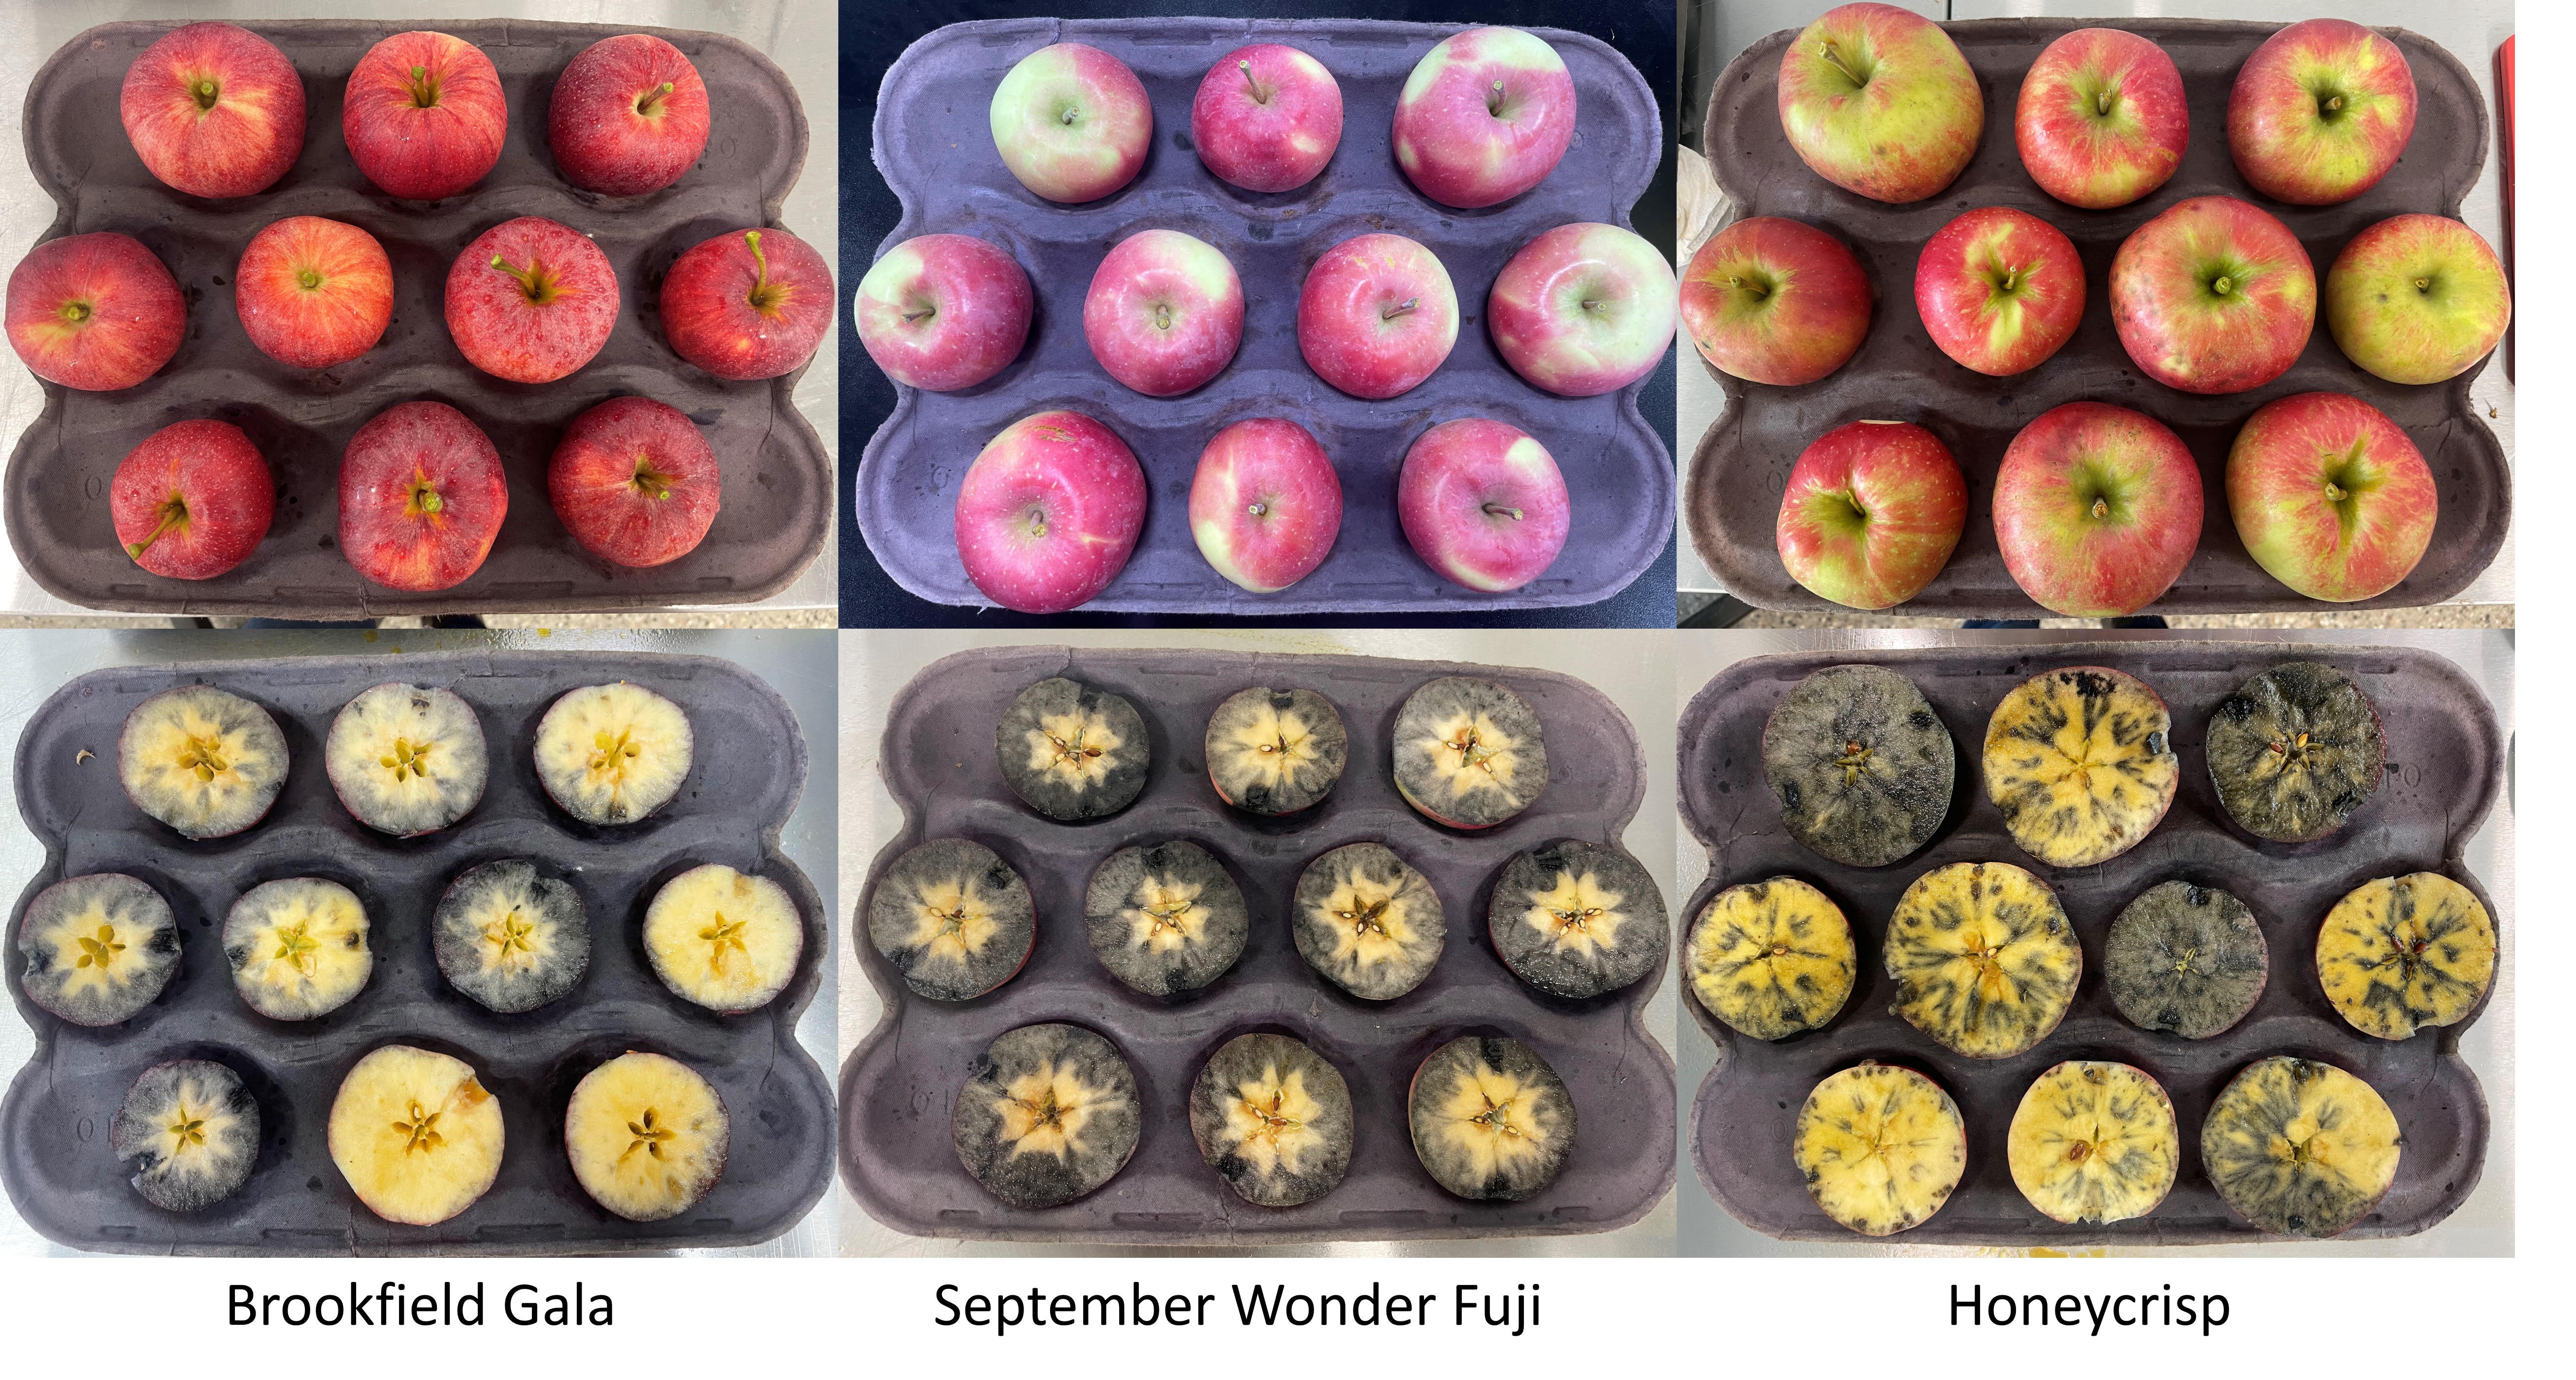 Apple maturity testing and starch staining on several apple varieties.